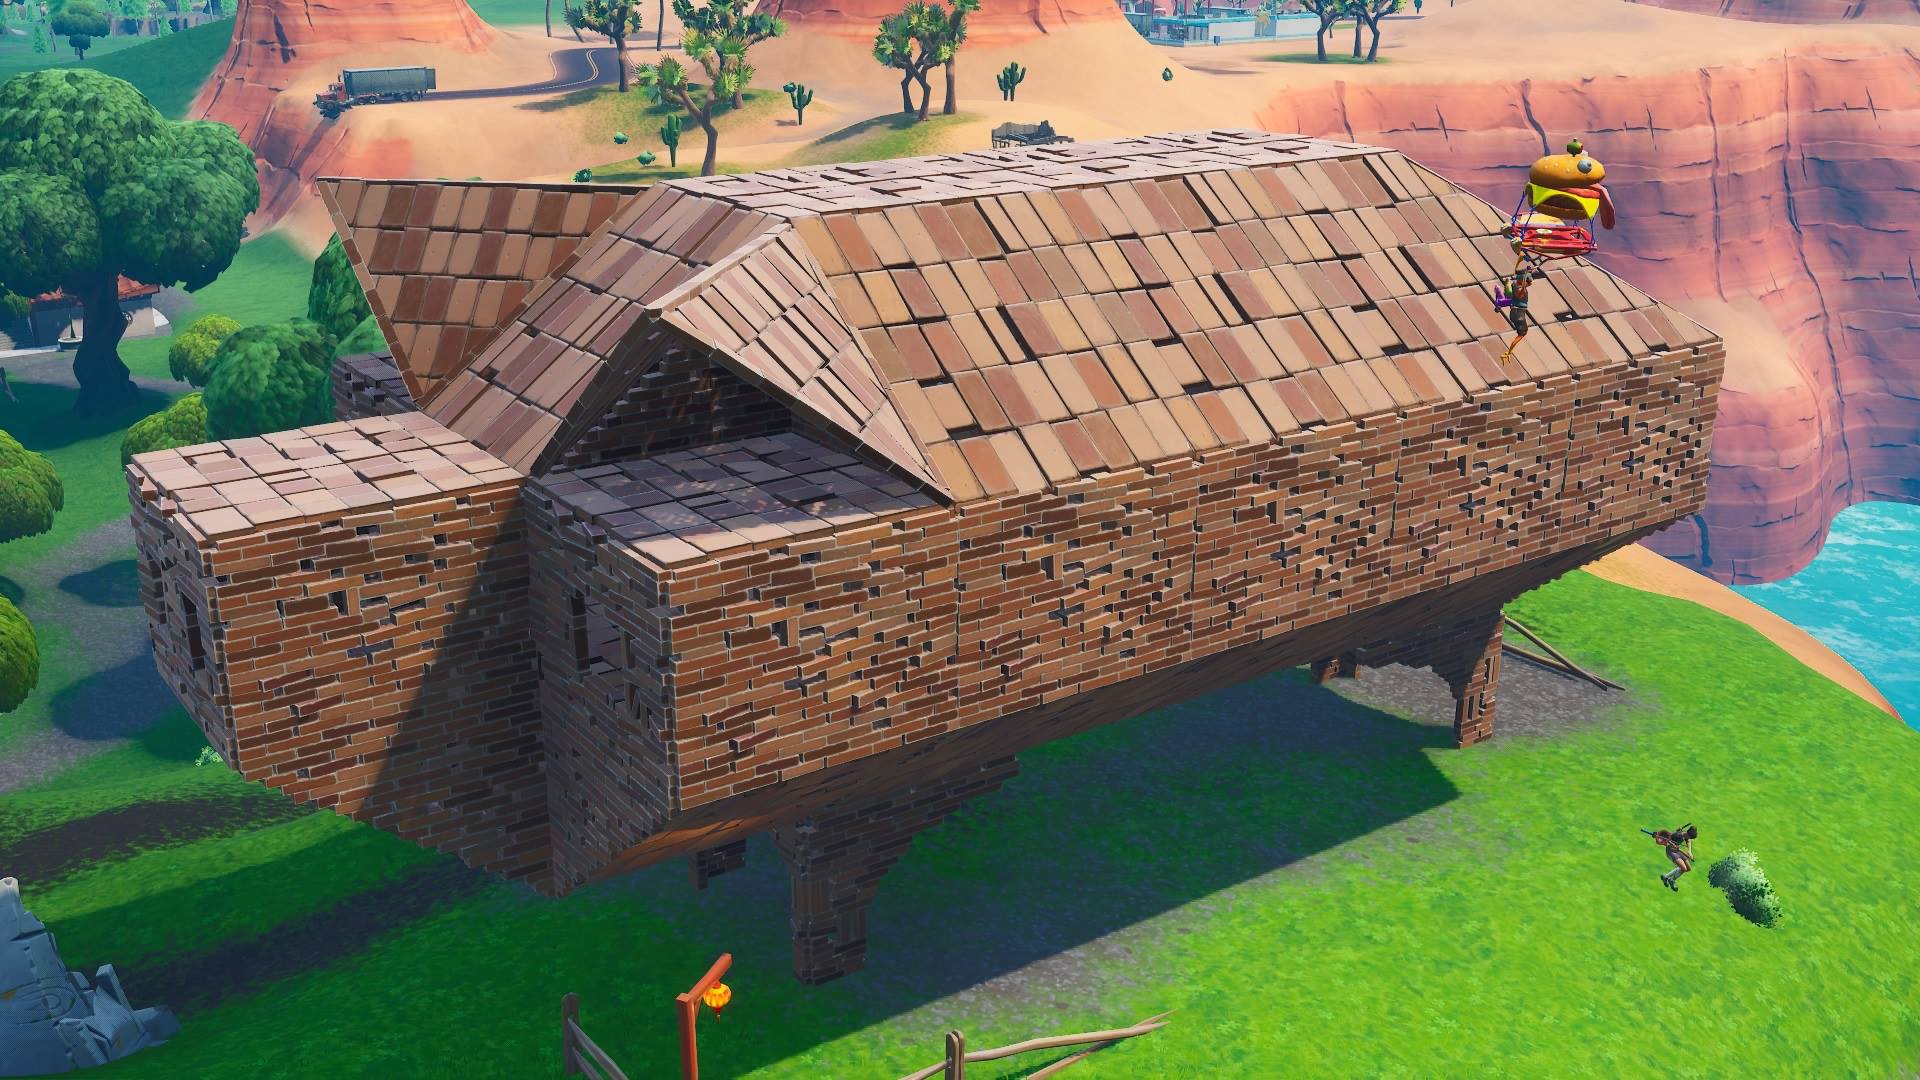 fortnite wooden rabbit stone pig and metal llama locations and map inverse - fortnite wooden rabbit stone pig location